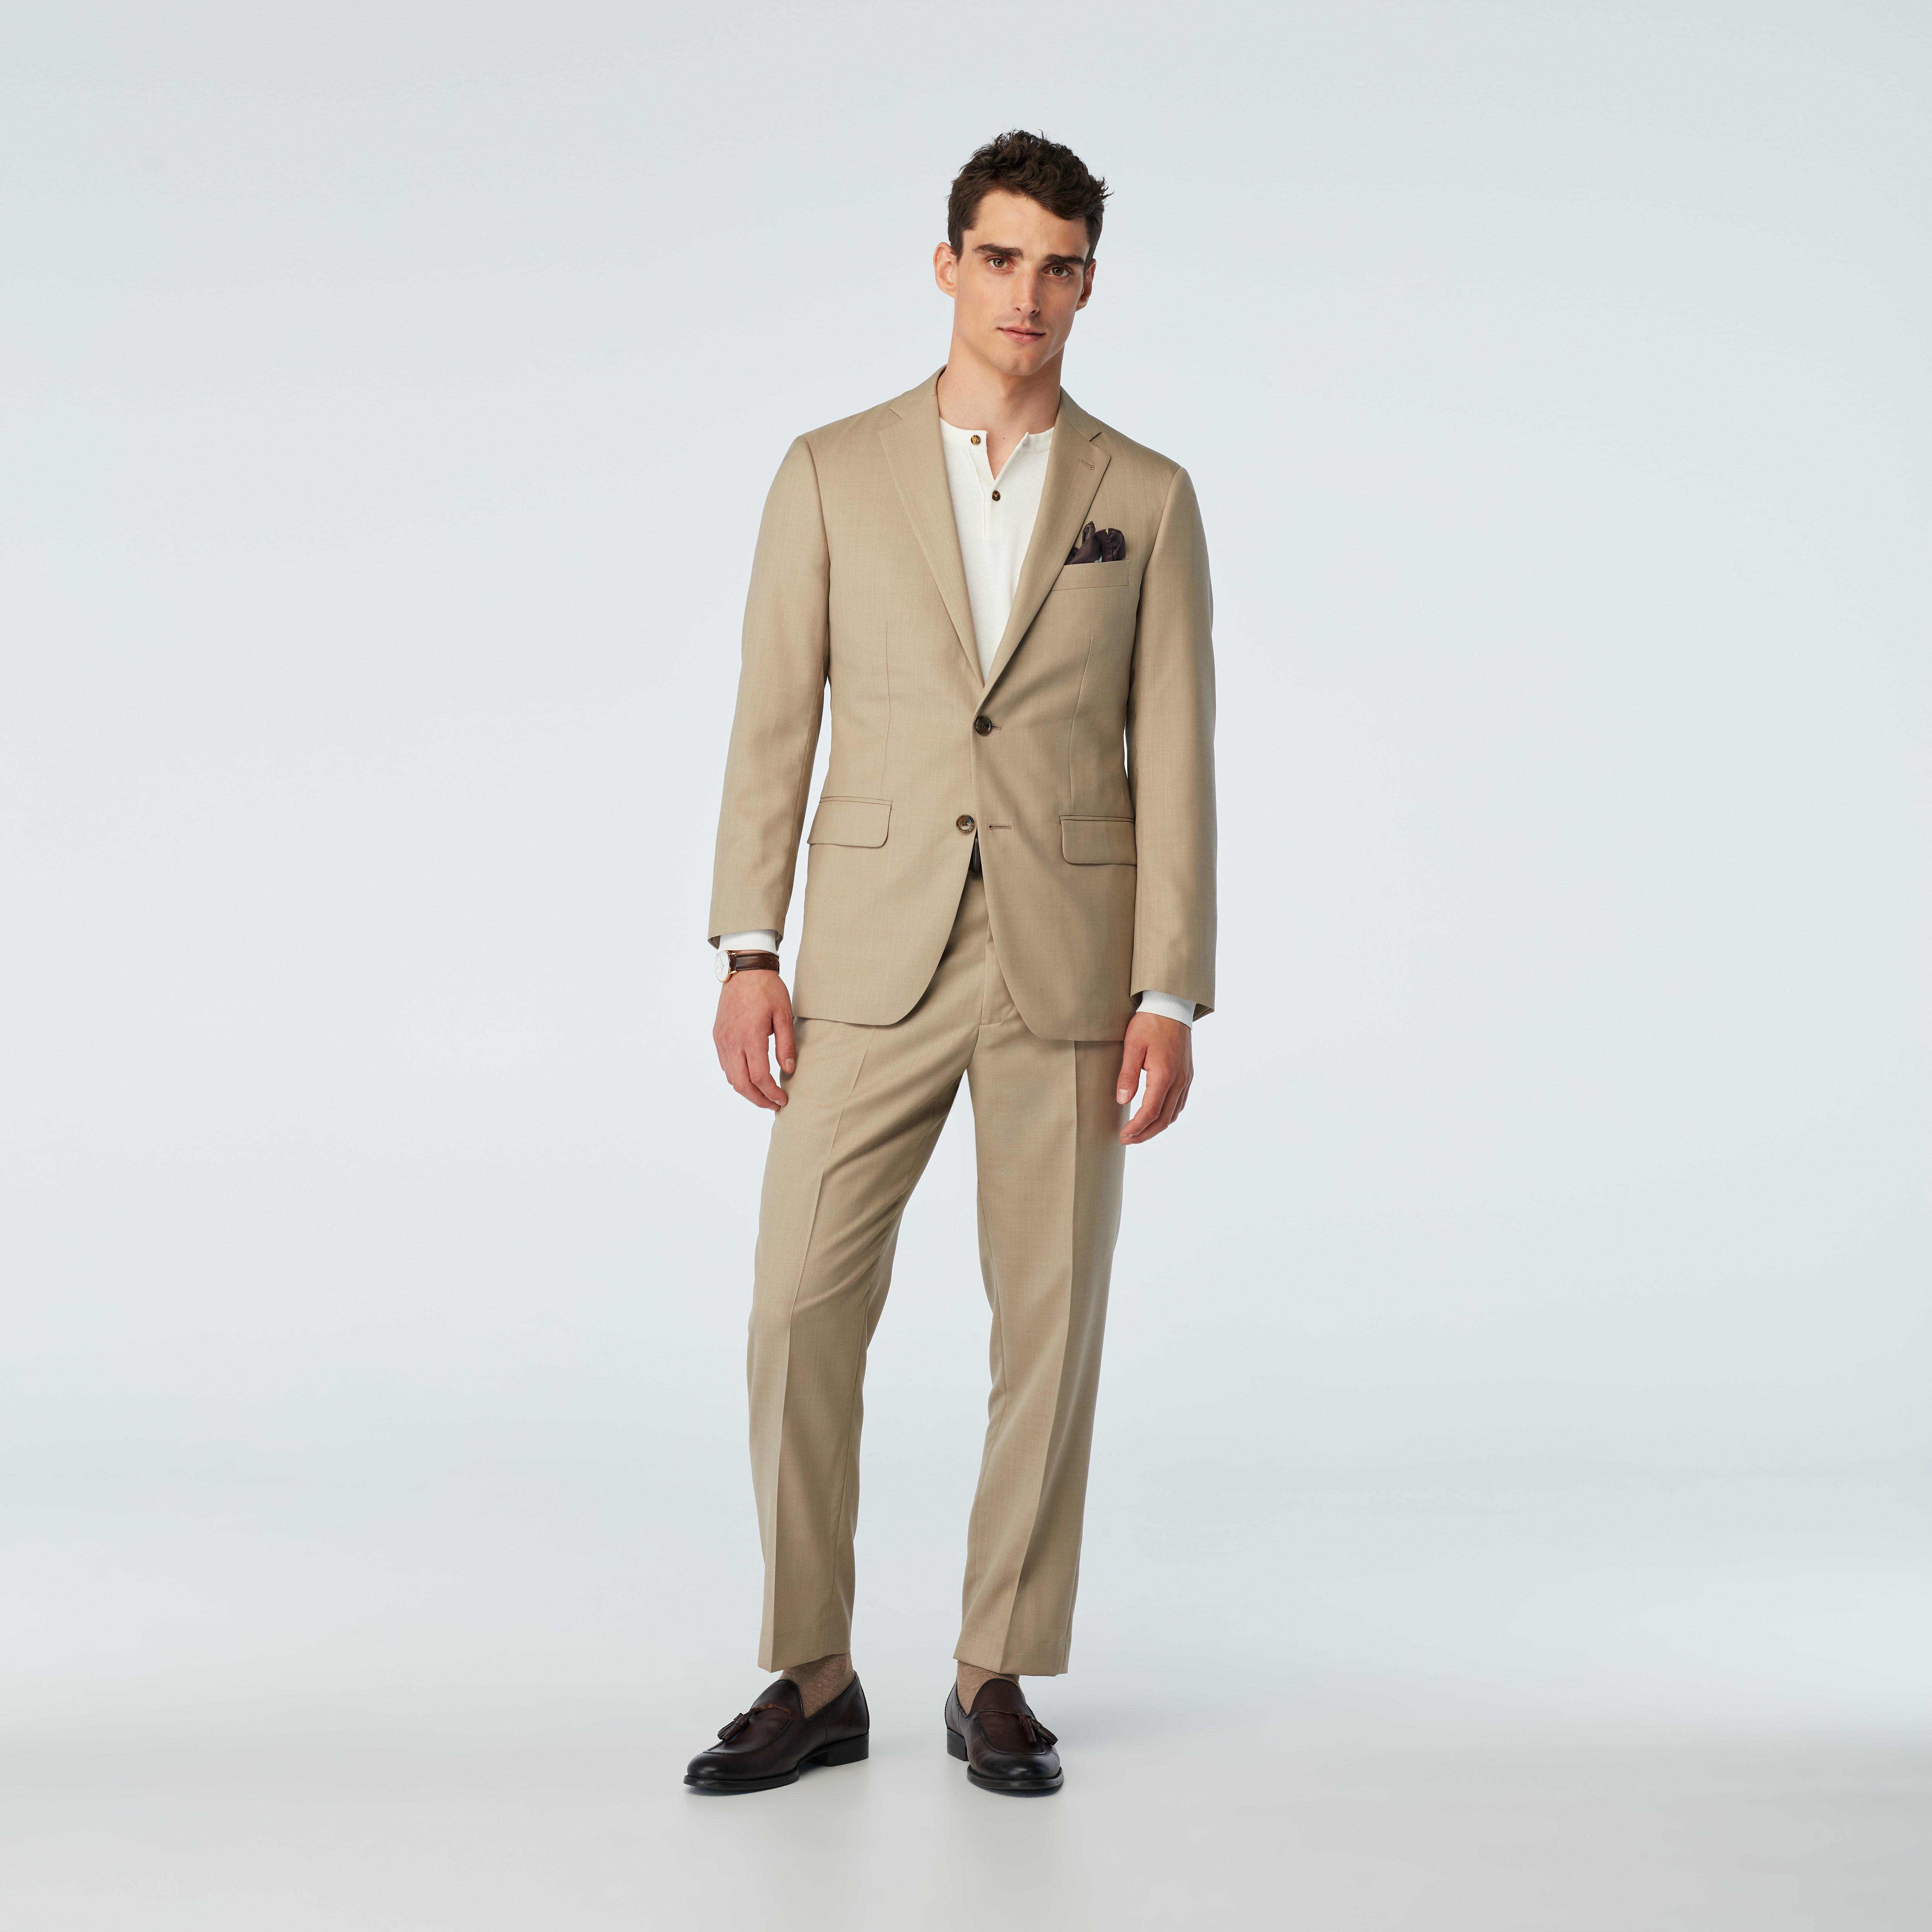 Men's Custom Suits - Odell Wool Sisal Sand Suit | INDOCHINO